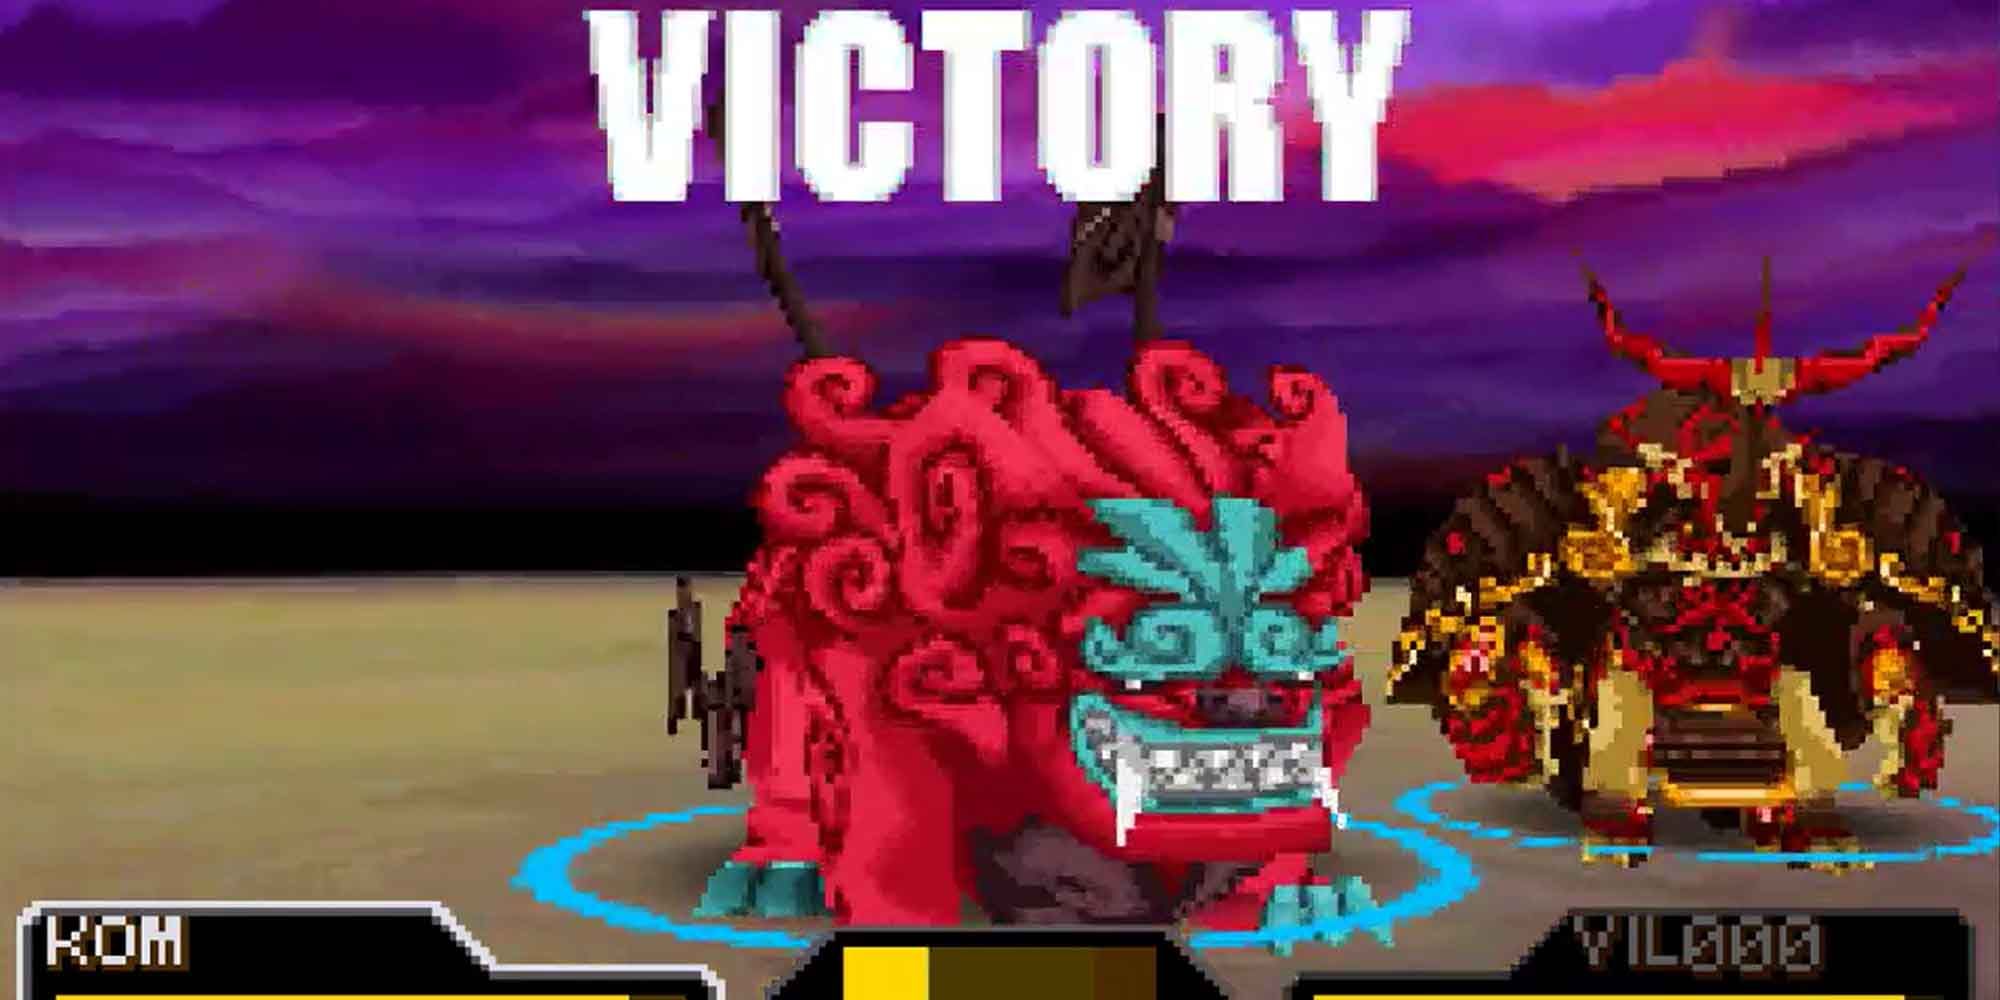 Winning a battle in Spectrobes for the Nintendo DS